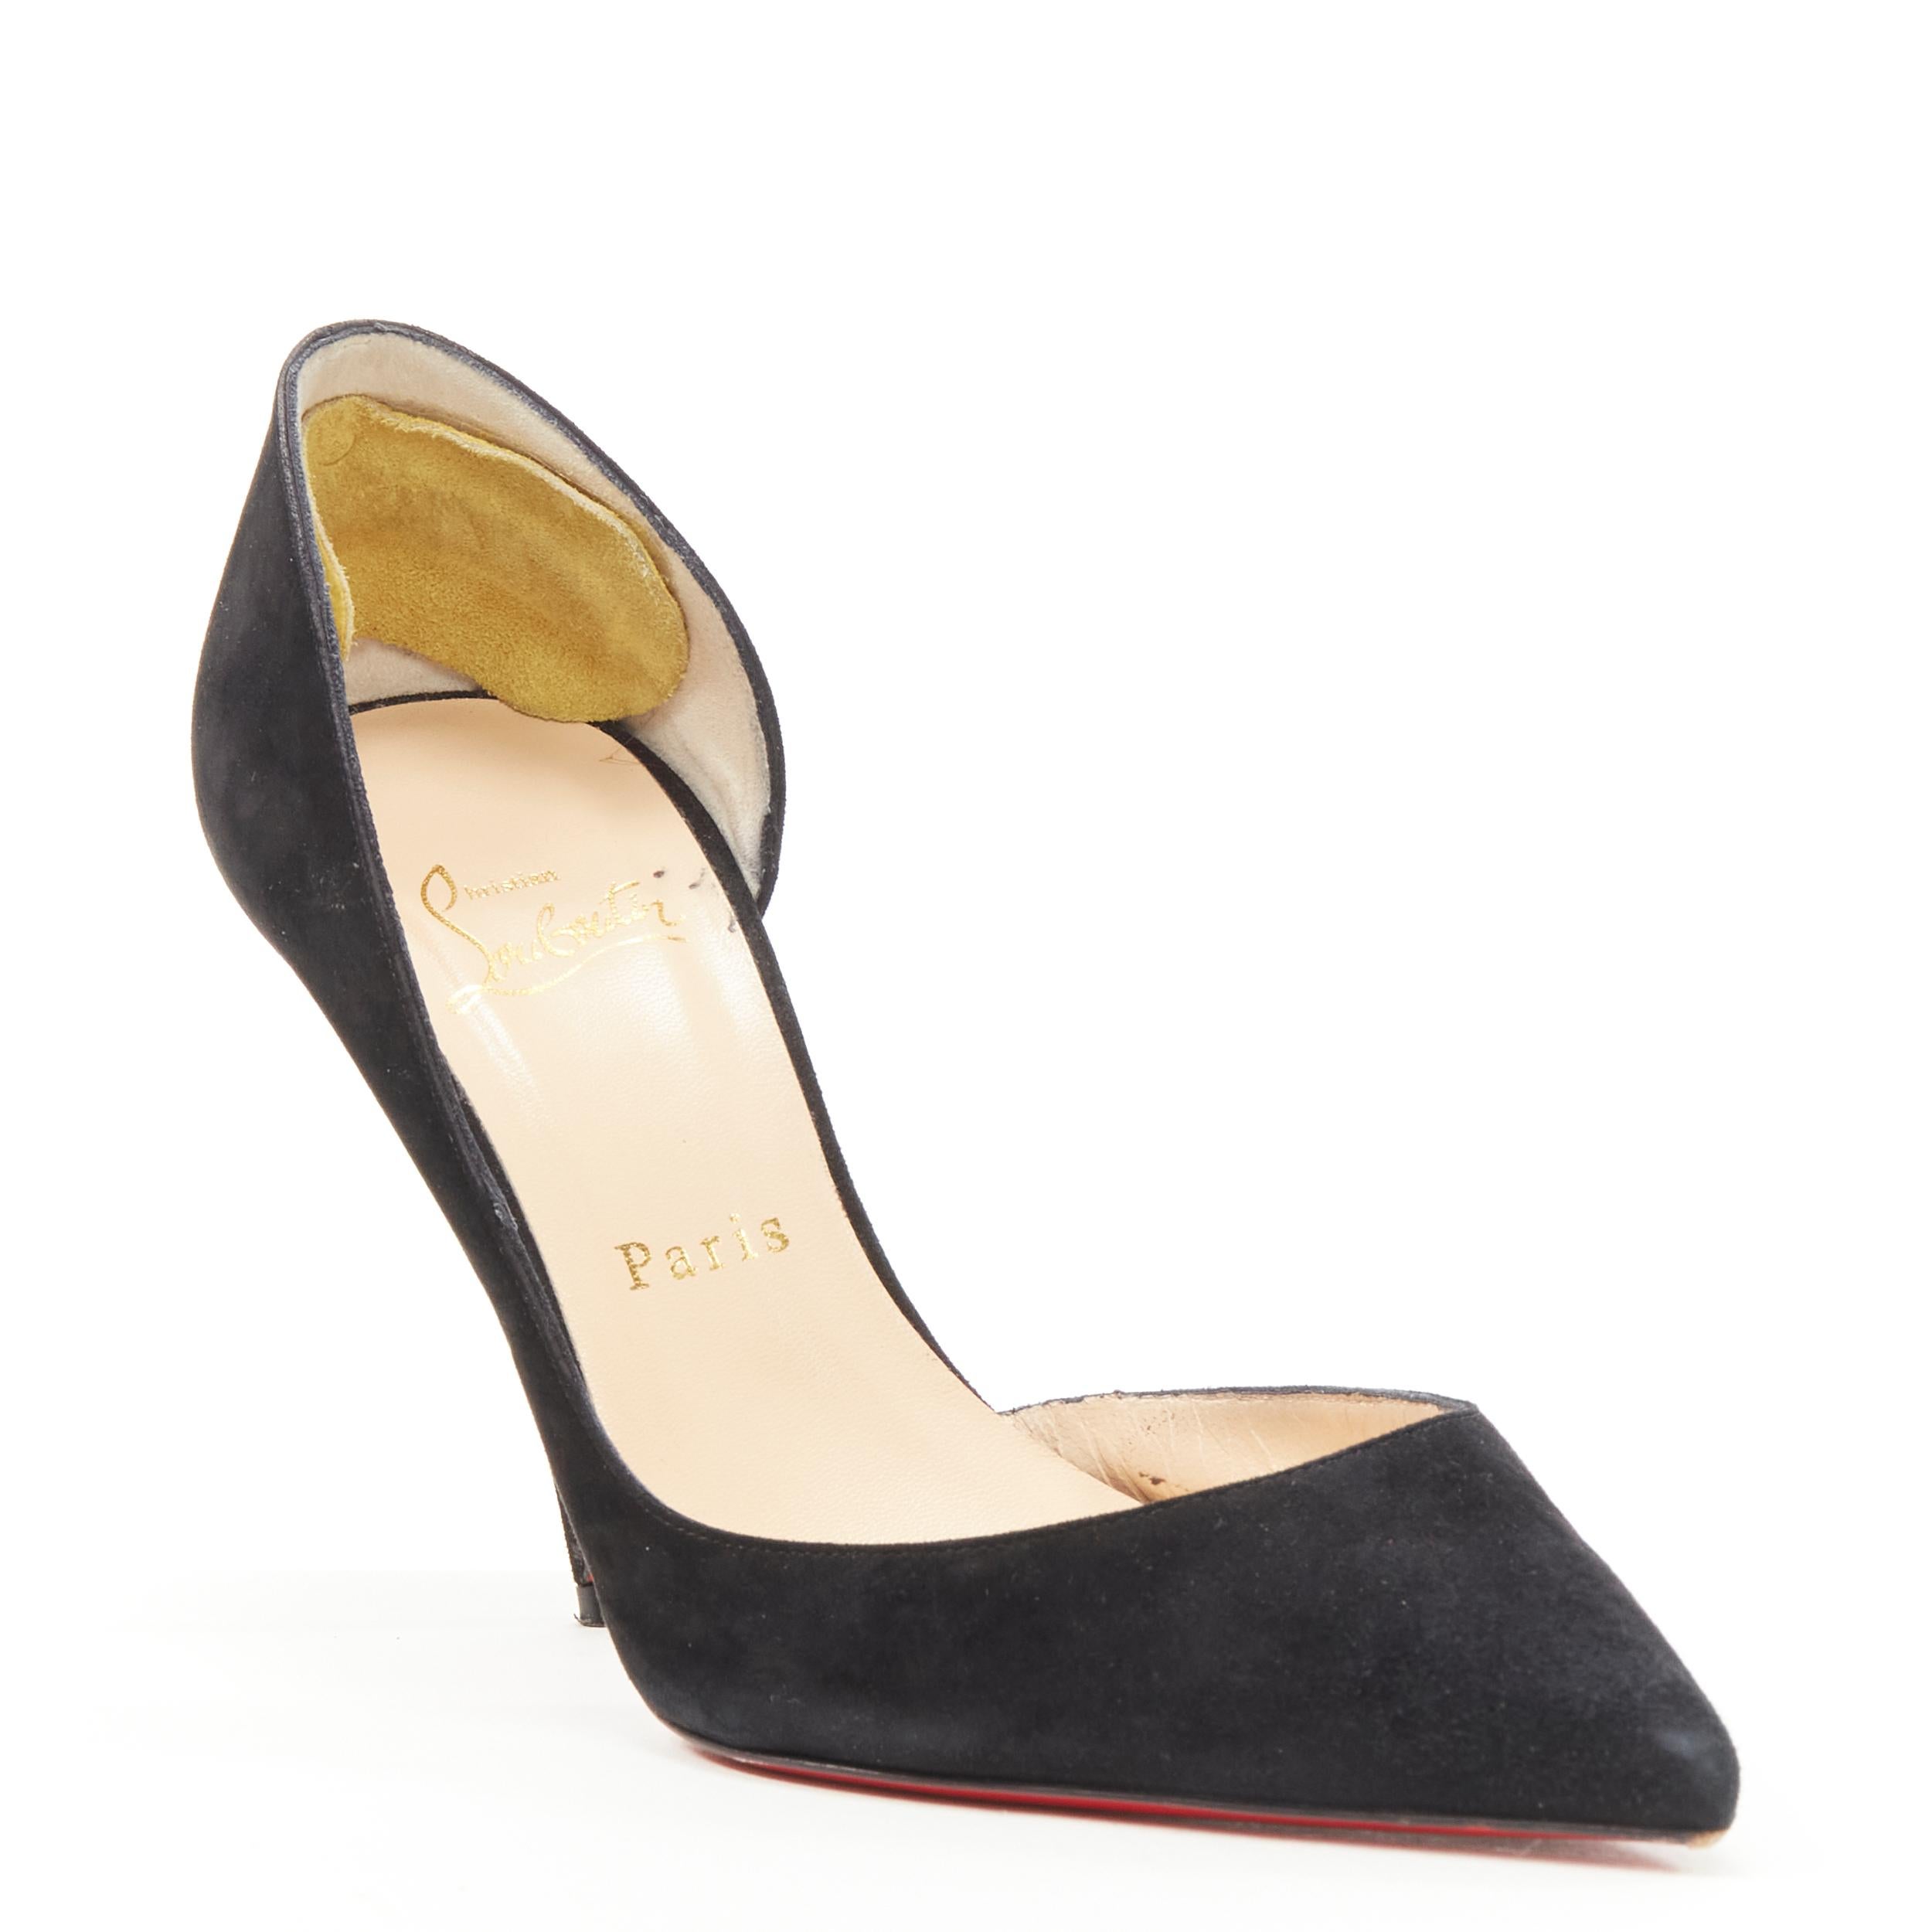 CHRISTIAN LOUBOUTIN Iriza 100 black suede dorsay stiletto pump EU38 
Reference: KEDG/A00127 
Brand: Christian Louboutin 
Model: Iriza 100 
Material: Suede 
Color: Black 
Pattern: Solid 
Extra Detail: Dorsay pump. 
Made in: Italy 
CONDITION: